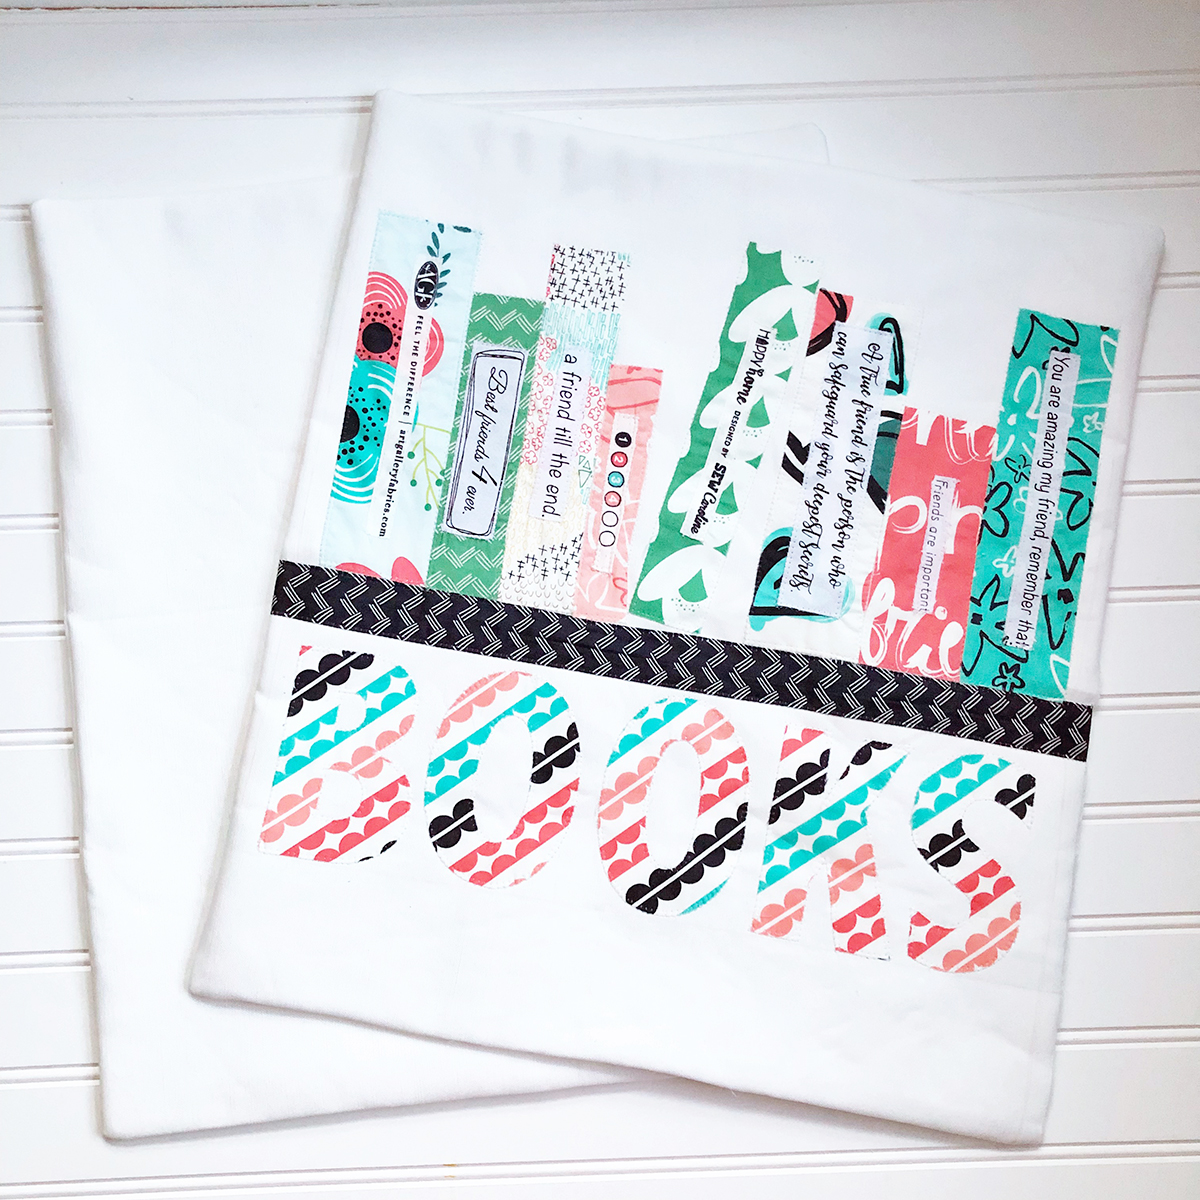 Library Book Tote and Pencil Case: Sewing the tote